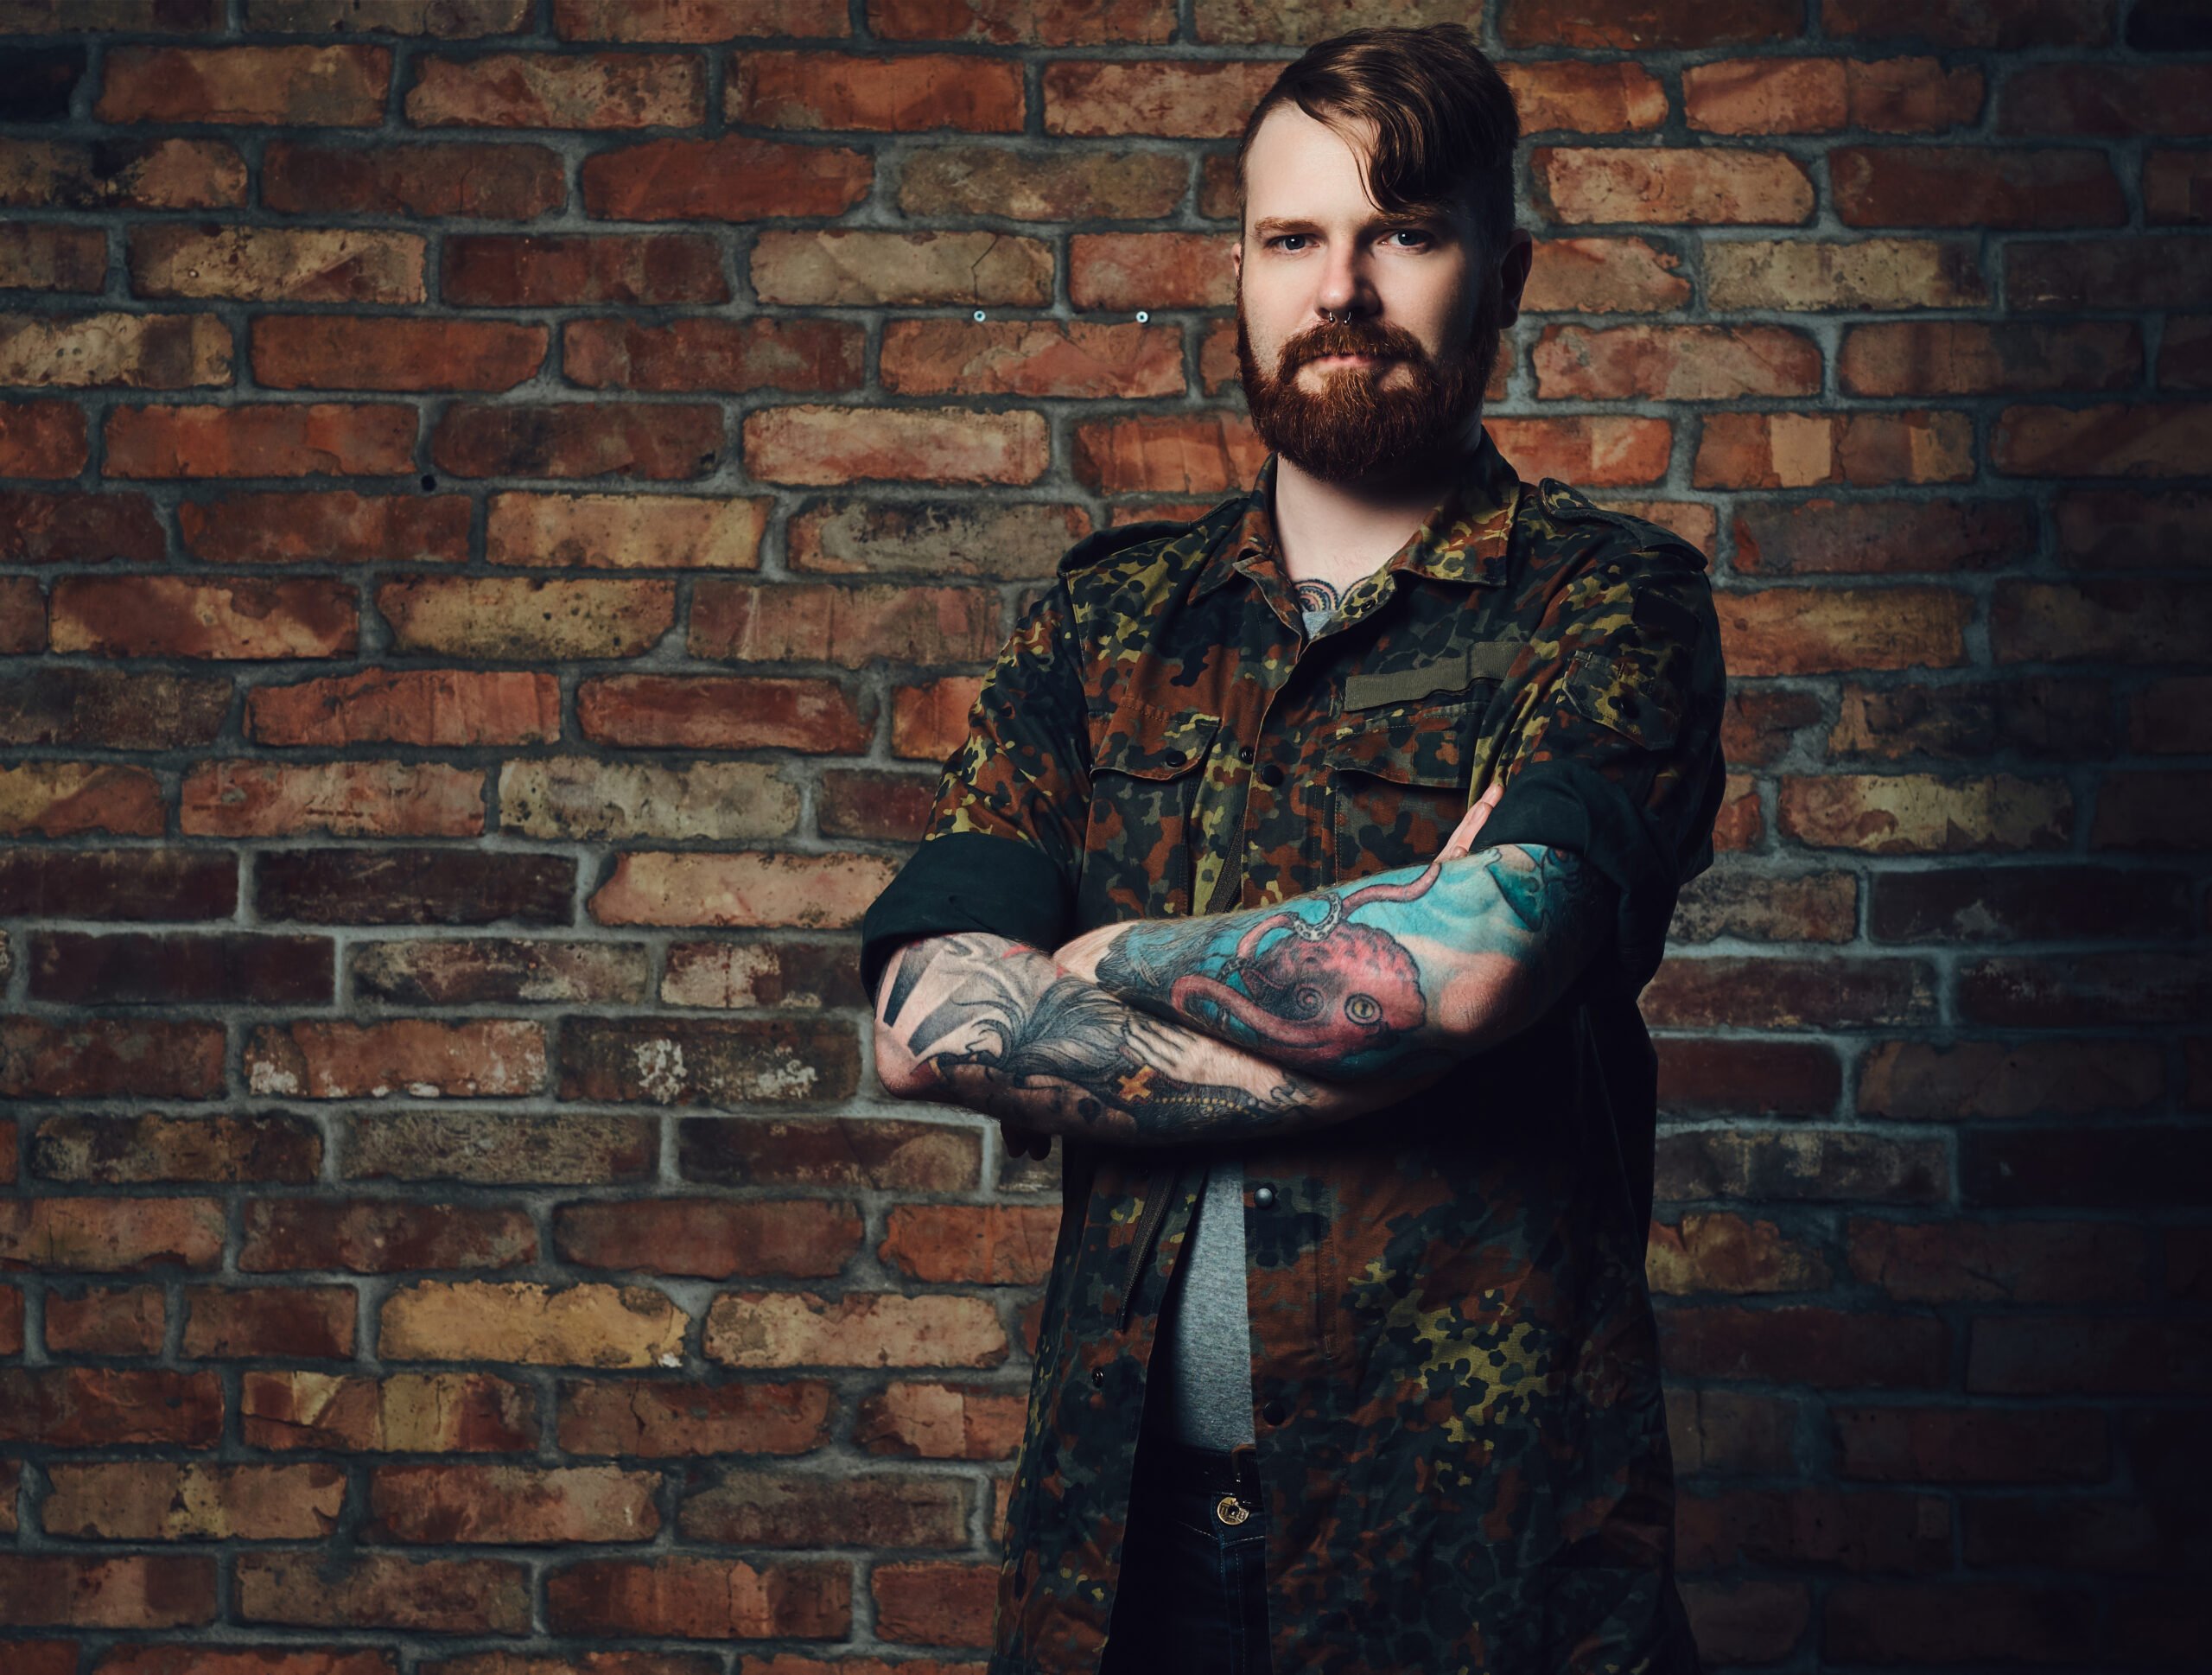 portrait-redhead-bearded-male-with-tattoos-arms-dressed-military-jacket-wall-brick-scaled.jpg